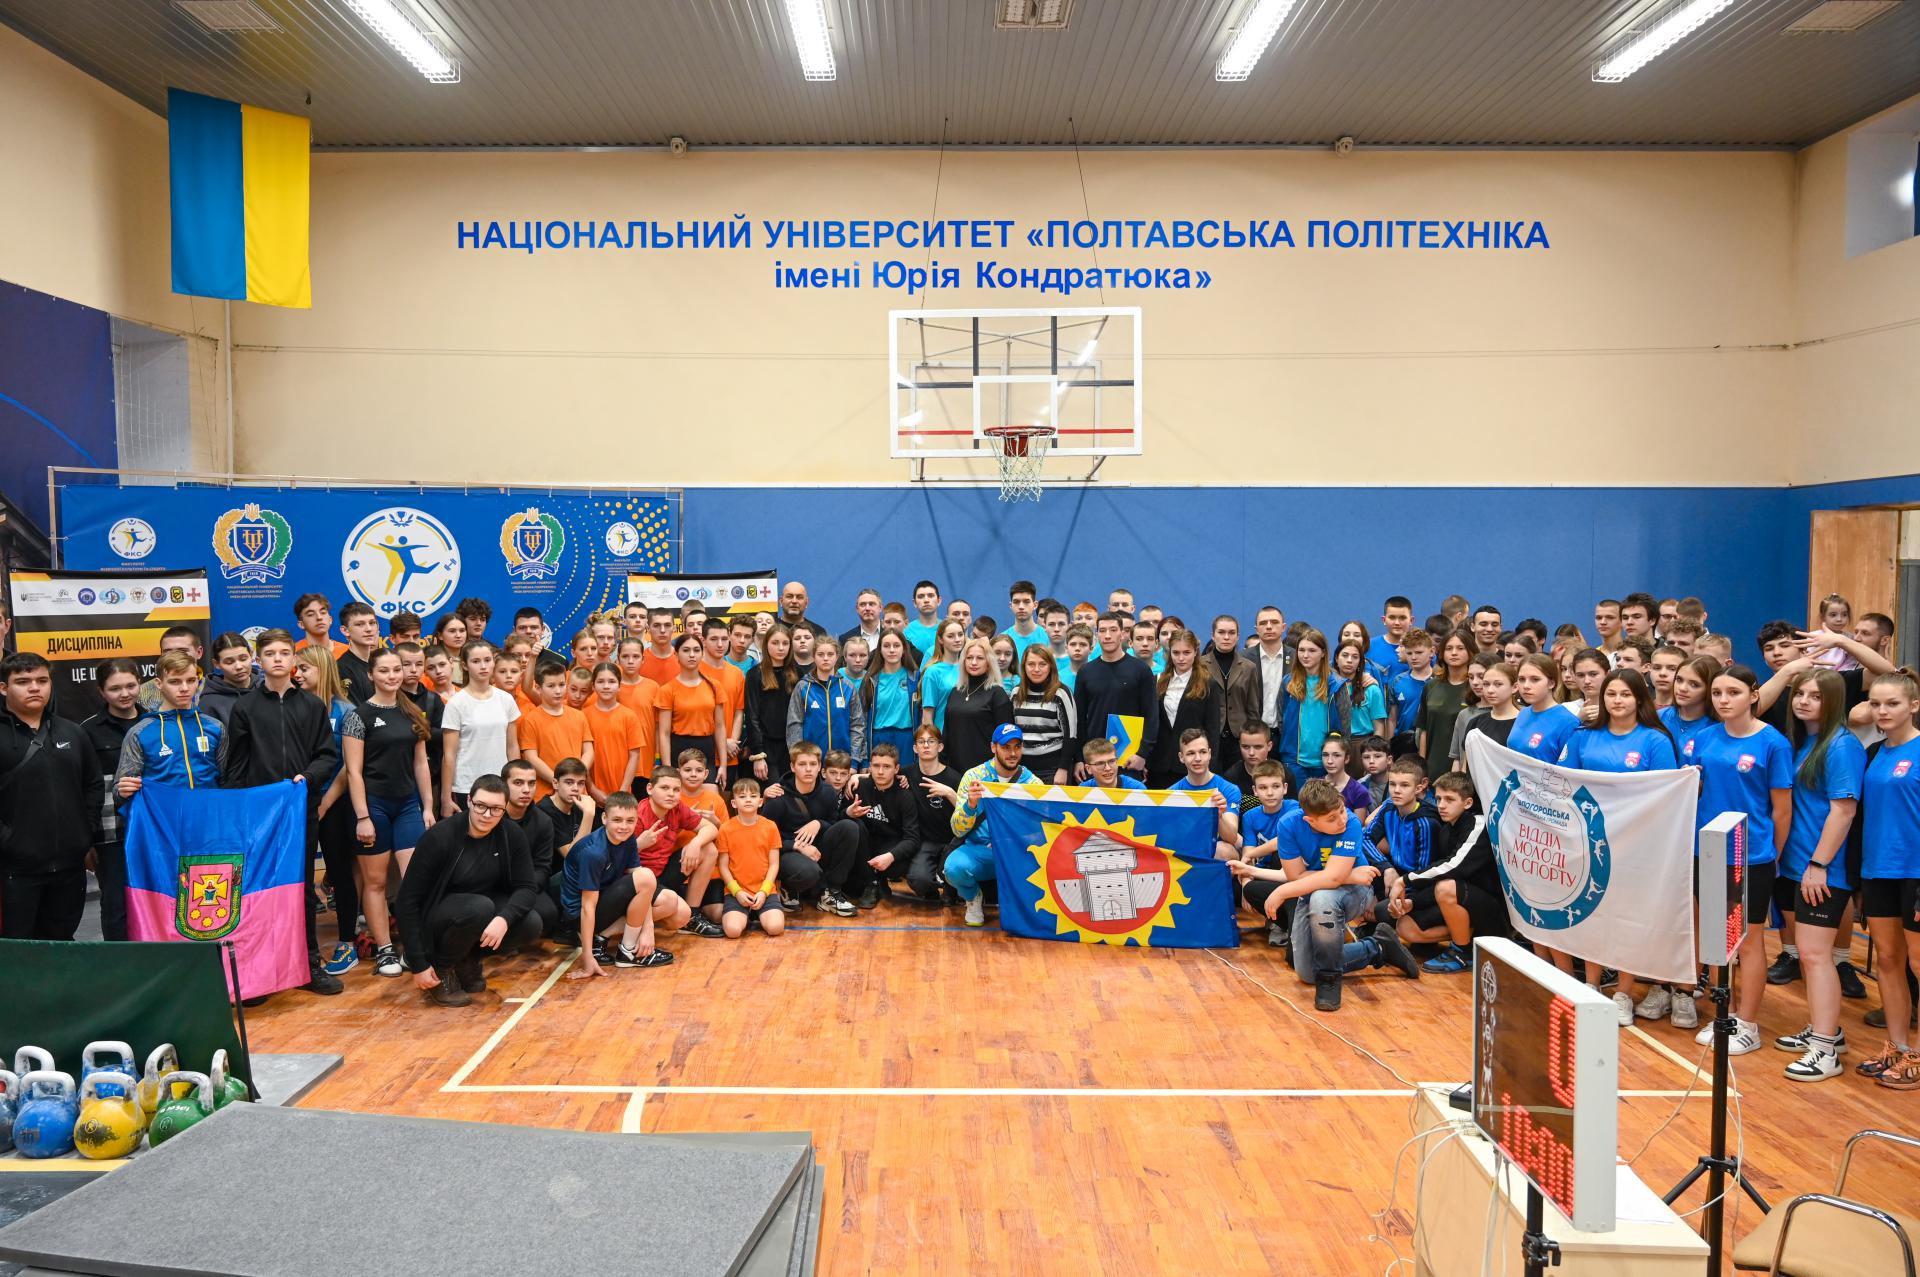 Winners and prize-winners of the Kettlebell Lifting Championship of Ukraine among students are determined